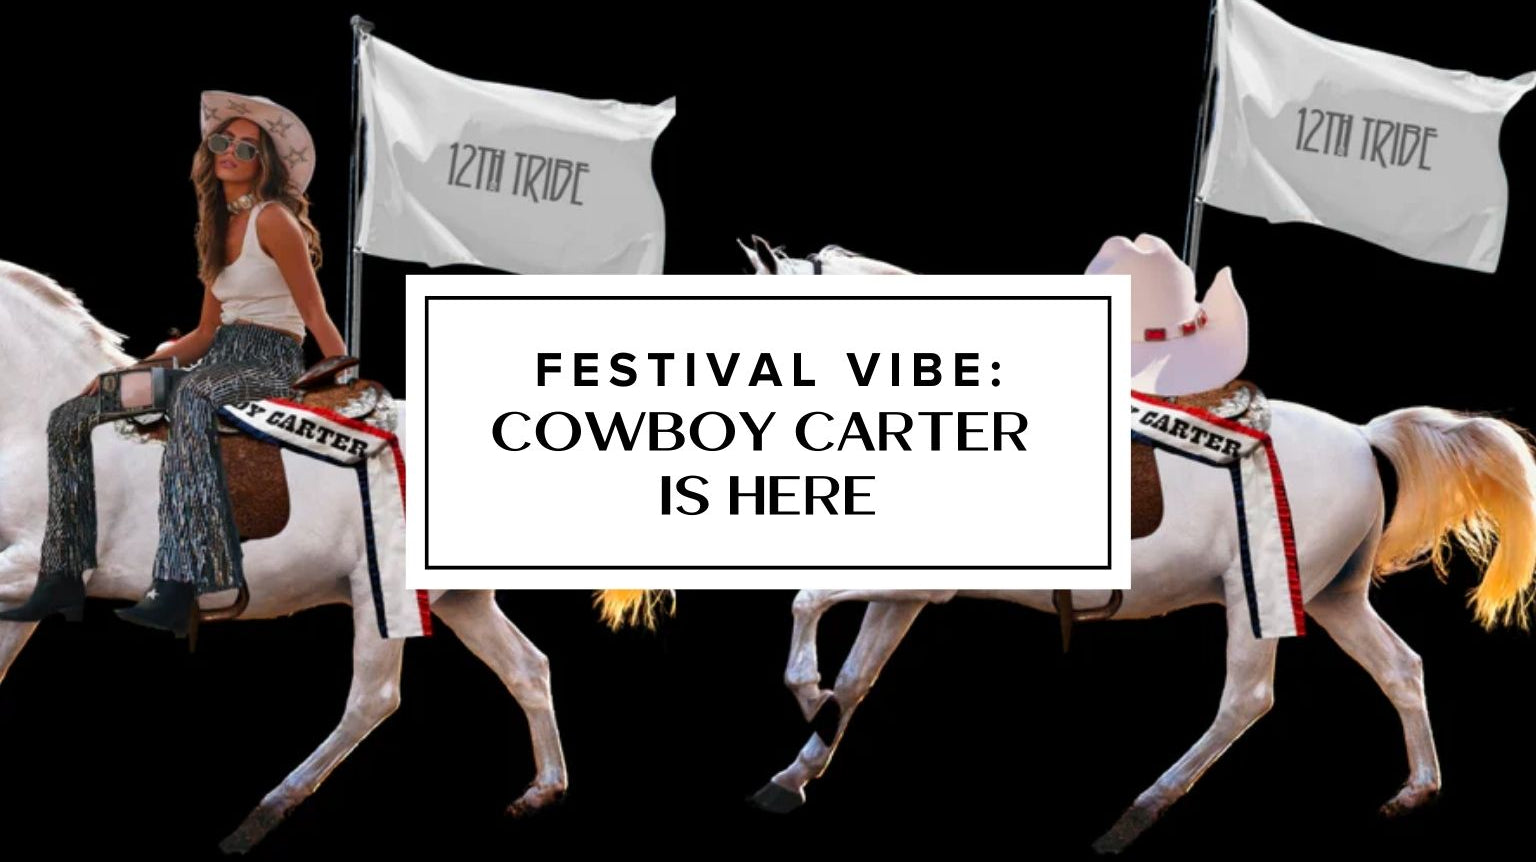 Cowboy Carter is here.. and our Cowgirl dreams are coming true!